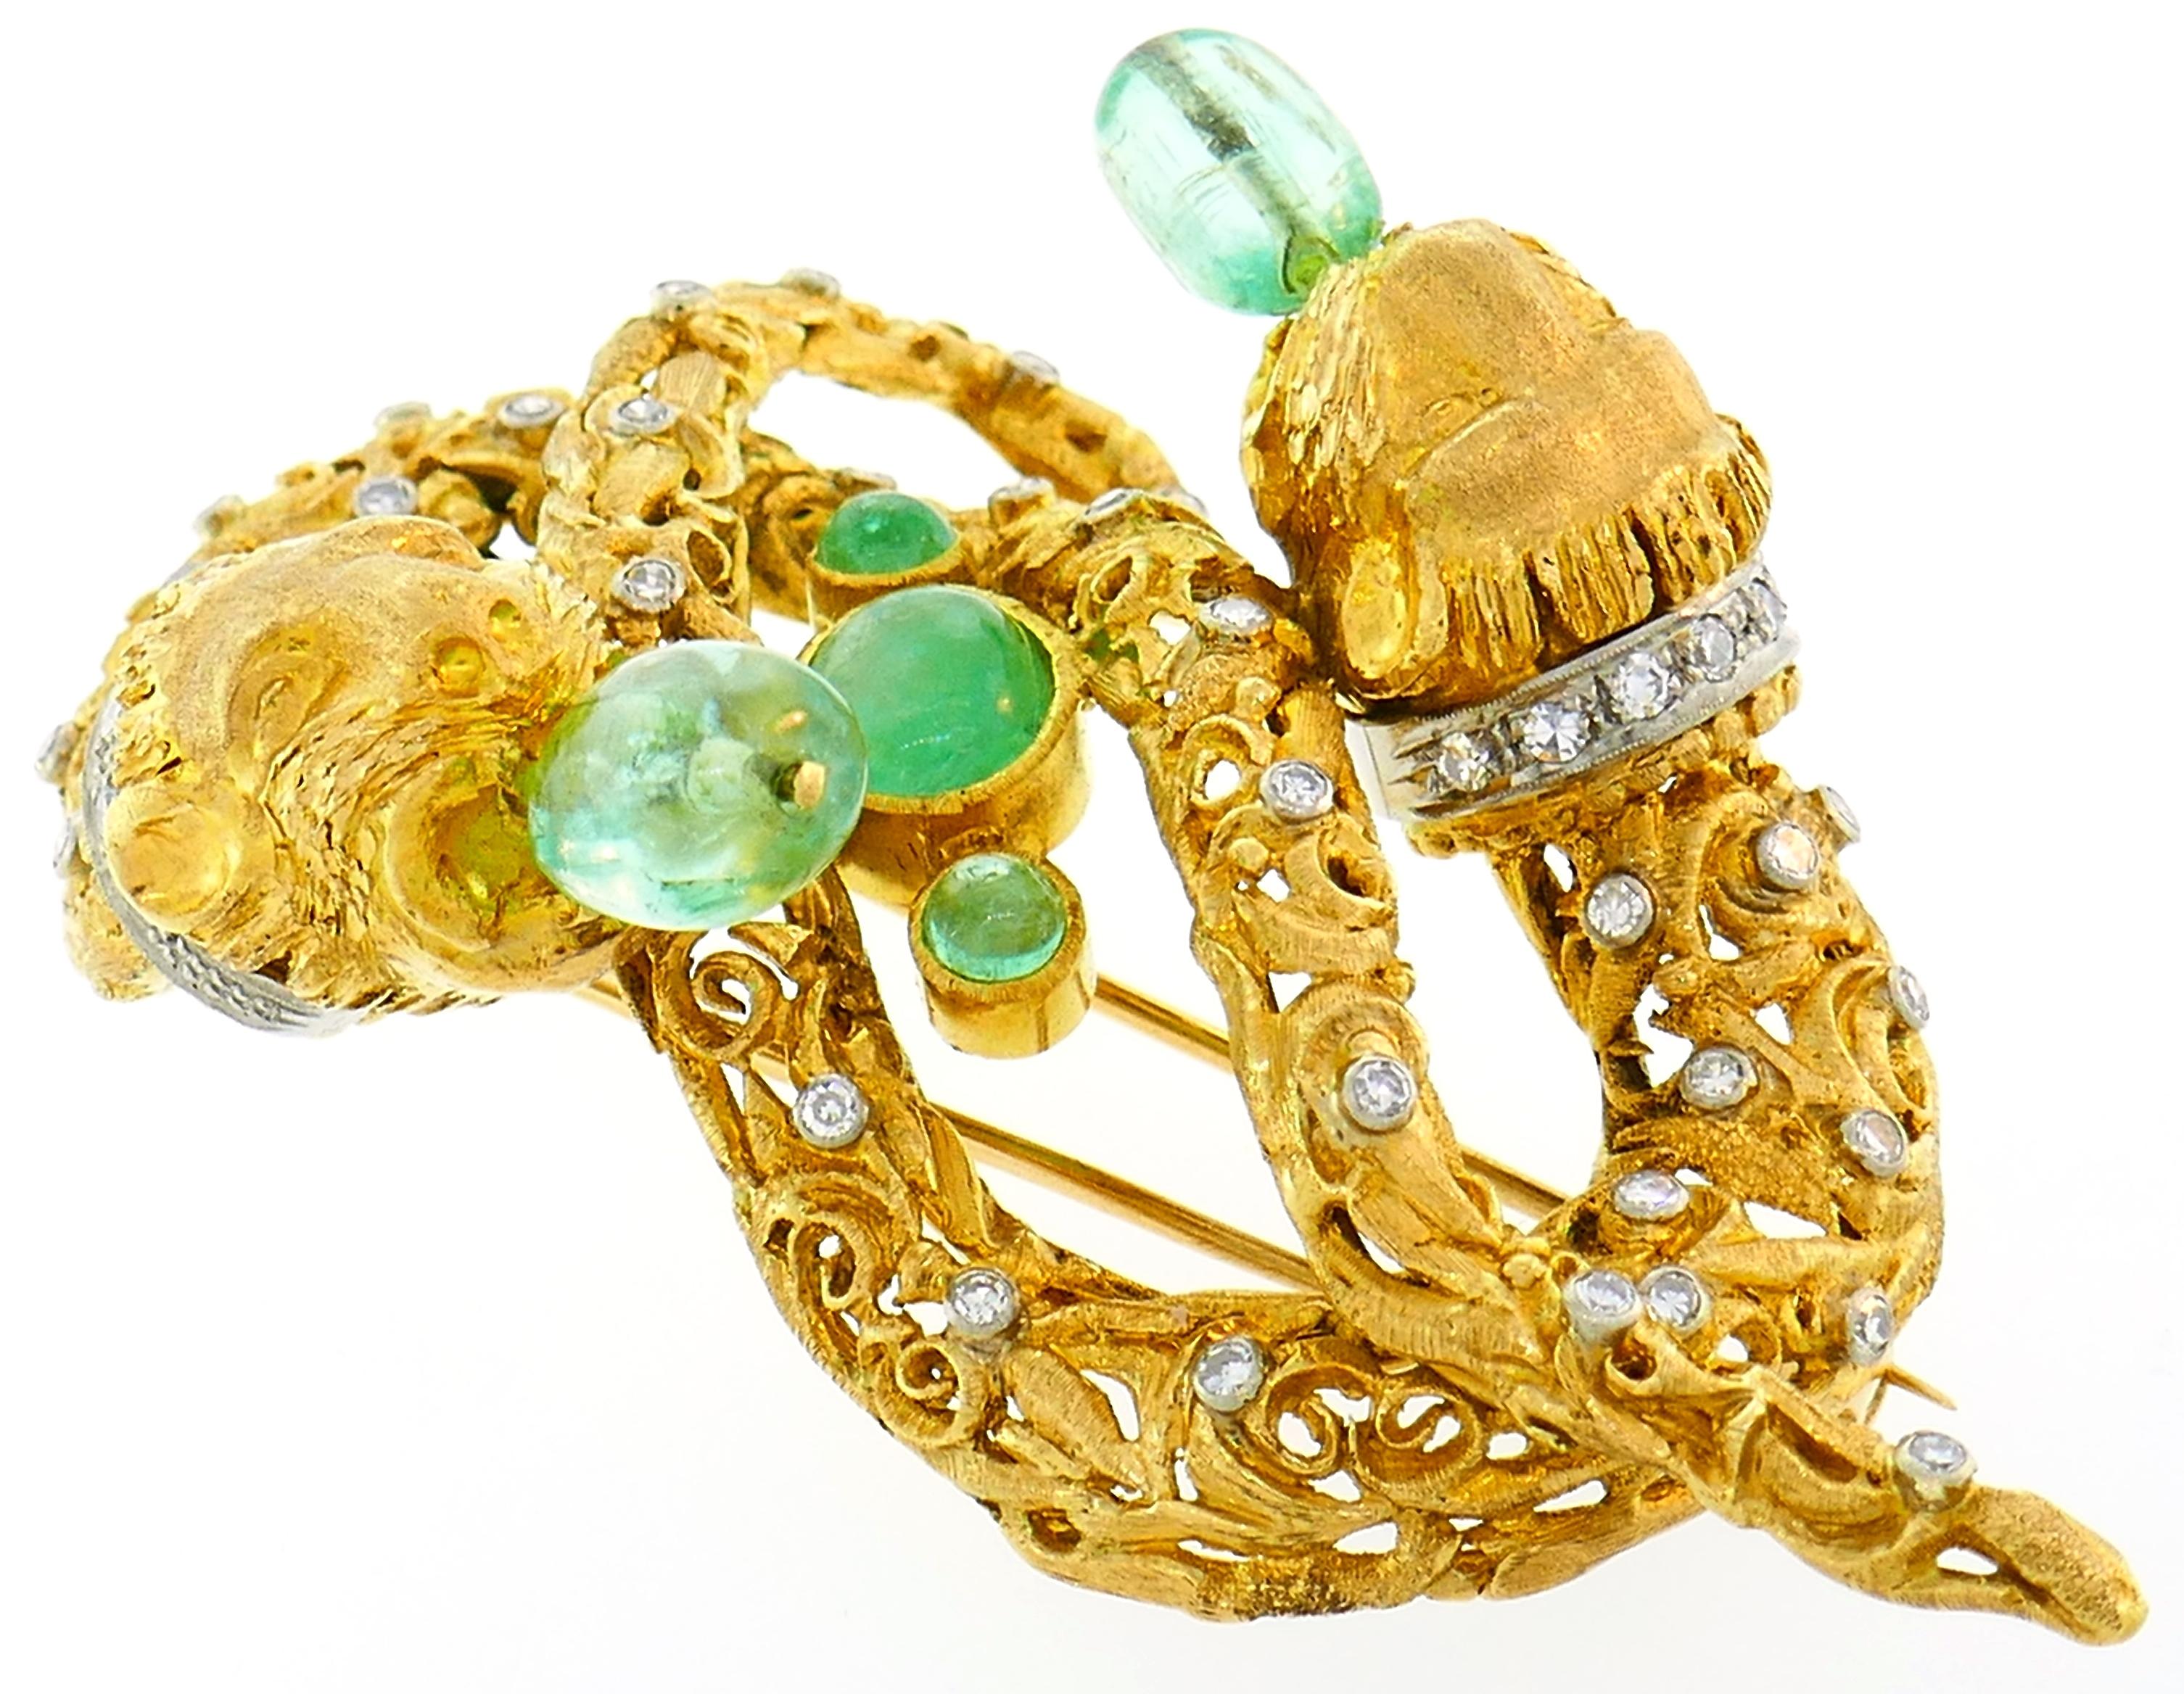 Popular Chimera Heads clip created in the 1970's. Ornate and made with great attention to details, it is definitely a conversational piece. 
It is made of 18 karat yellow gold, set with single cut diamonds and five emerald cabochons. The diamonds